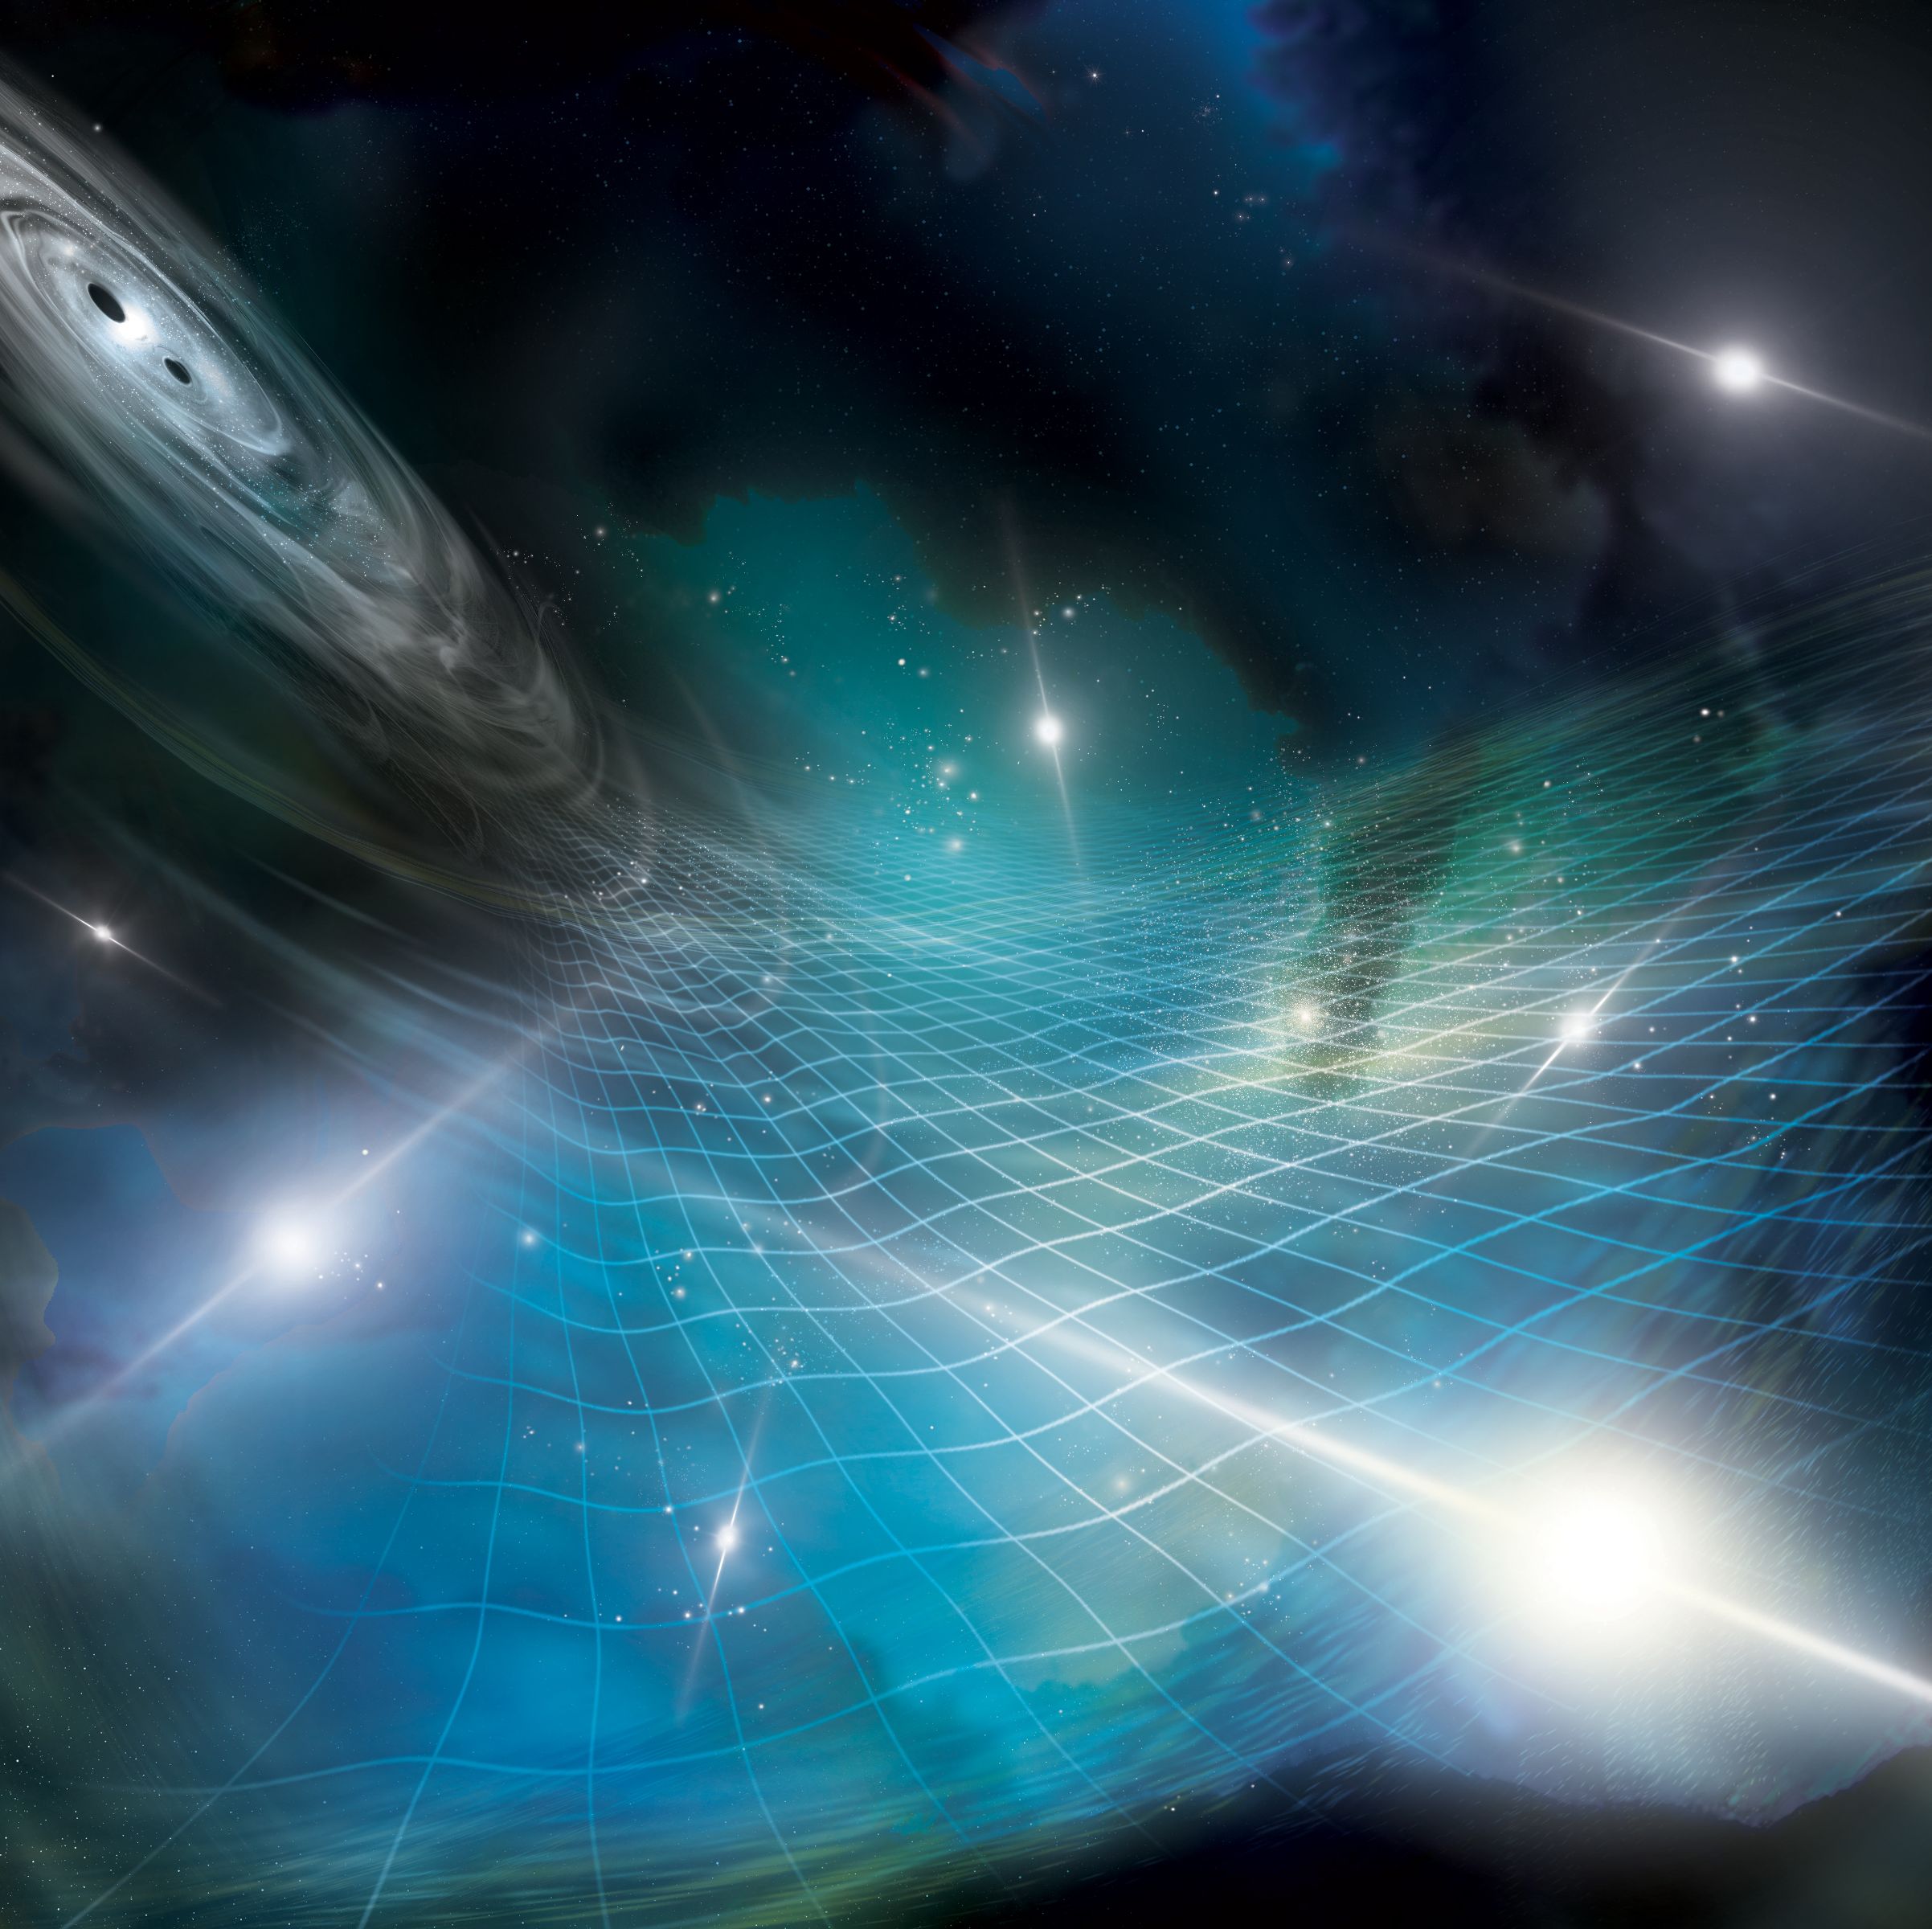 BREAKING: Scientists Find the Gravitational Wave Background, Ushering in Astronomy 2.0